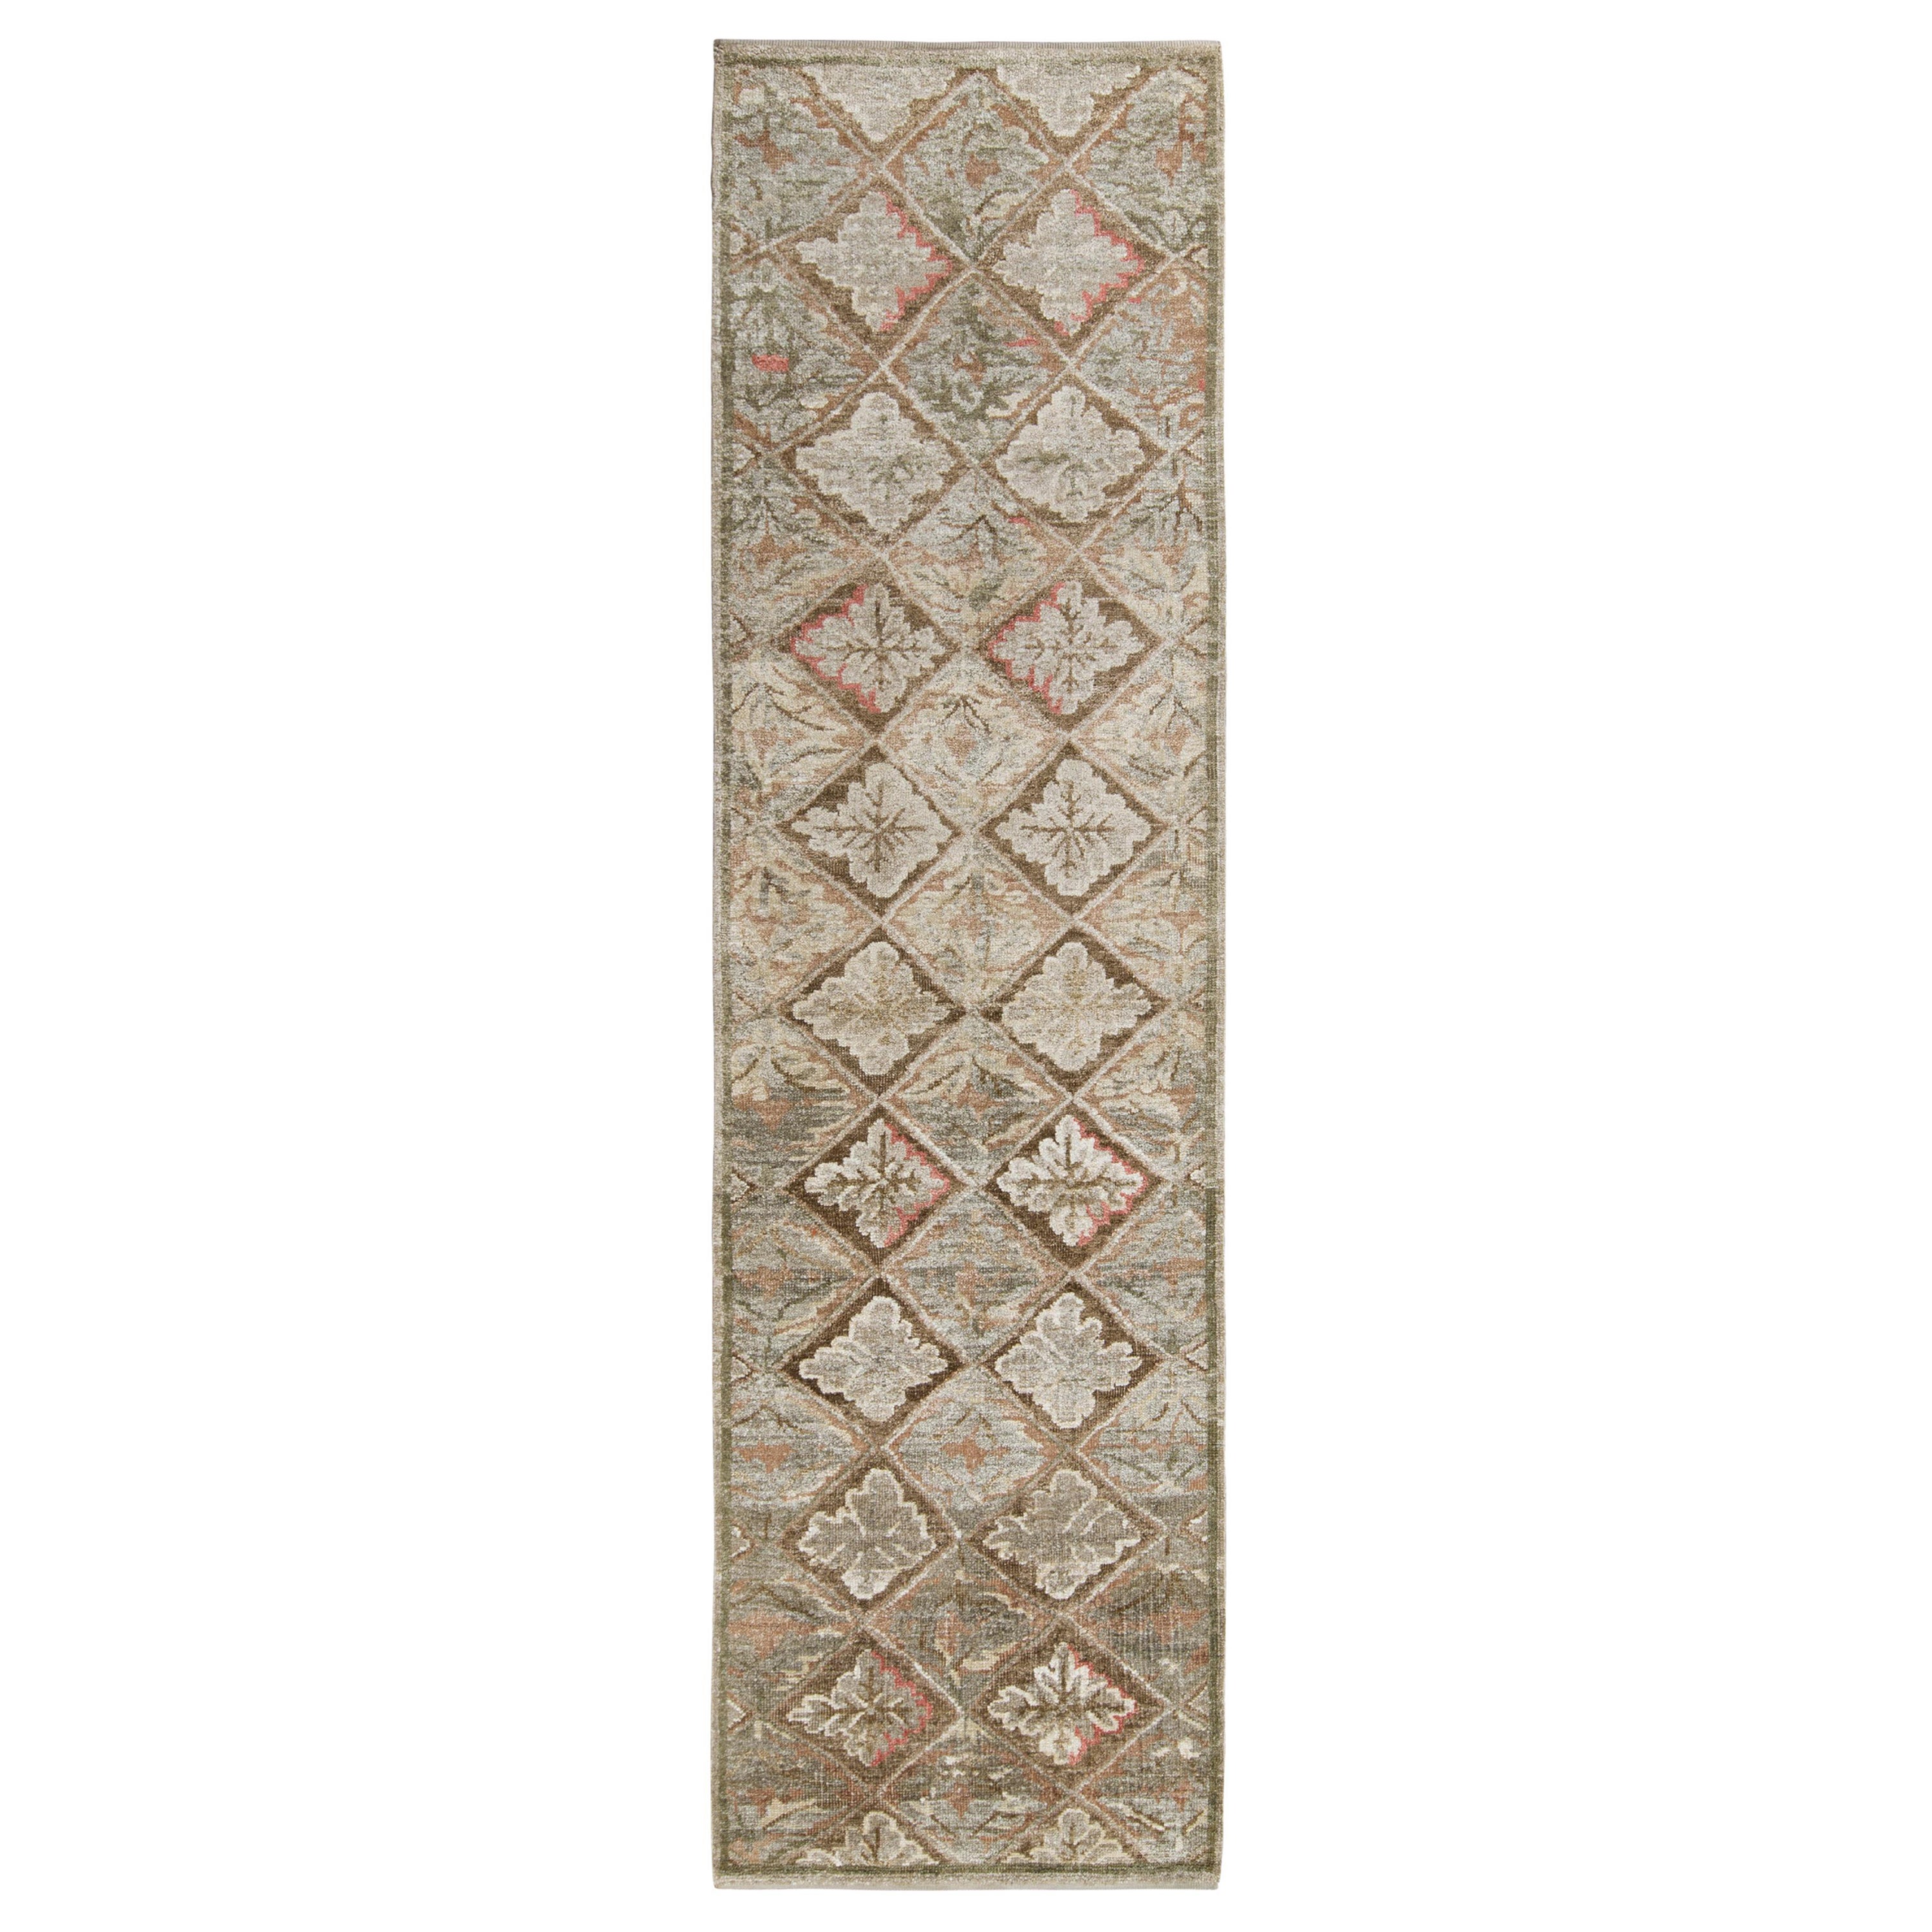 Tapis & Kilim's French Aubusson Style Runner in Green, Beige-Brown Floral Pattern (en anglais) en vente